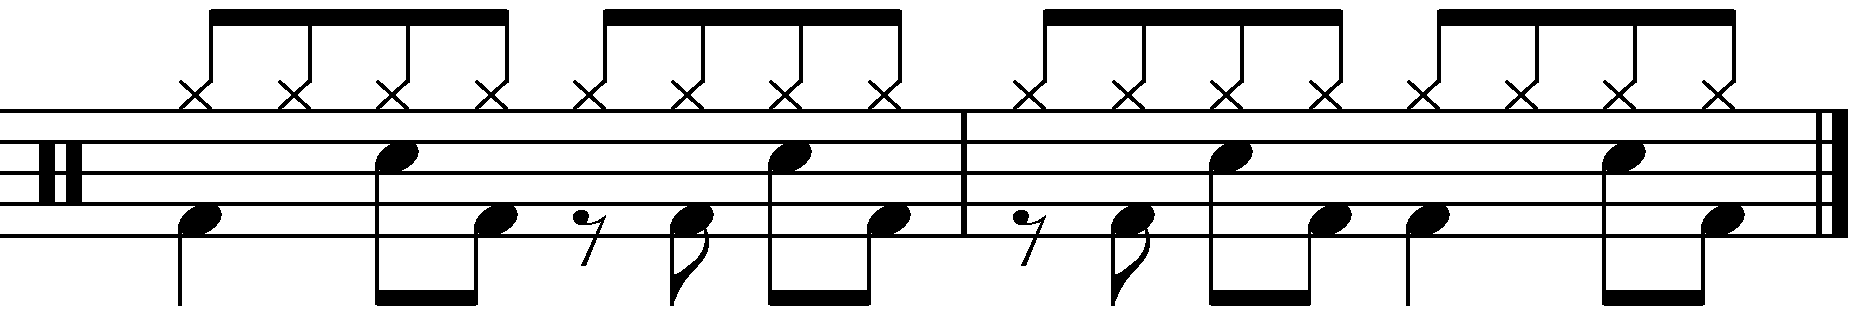 2 Bar Grooves - Example 2f